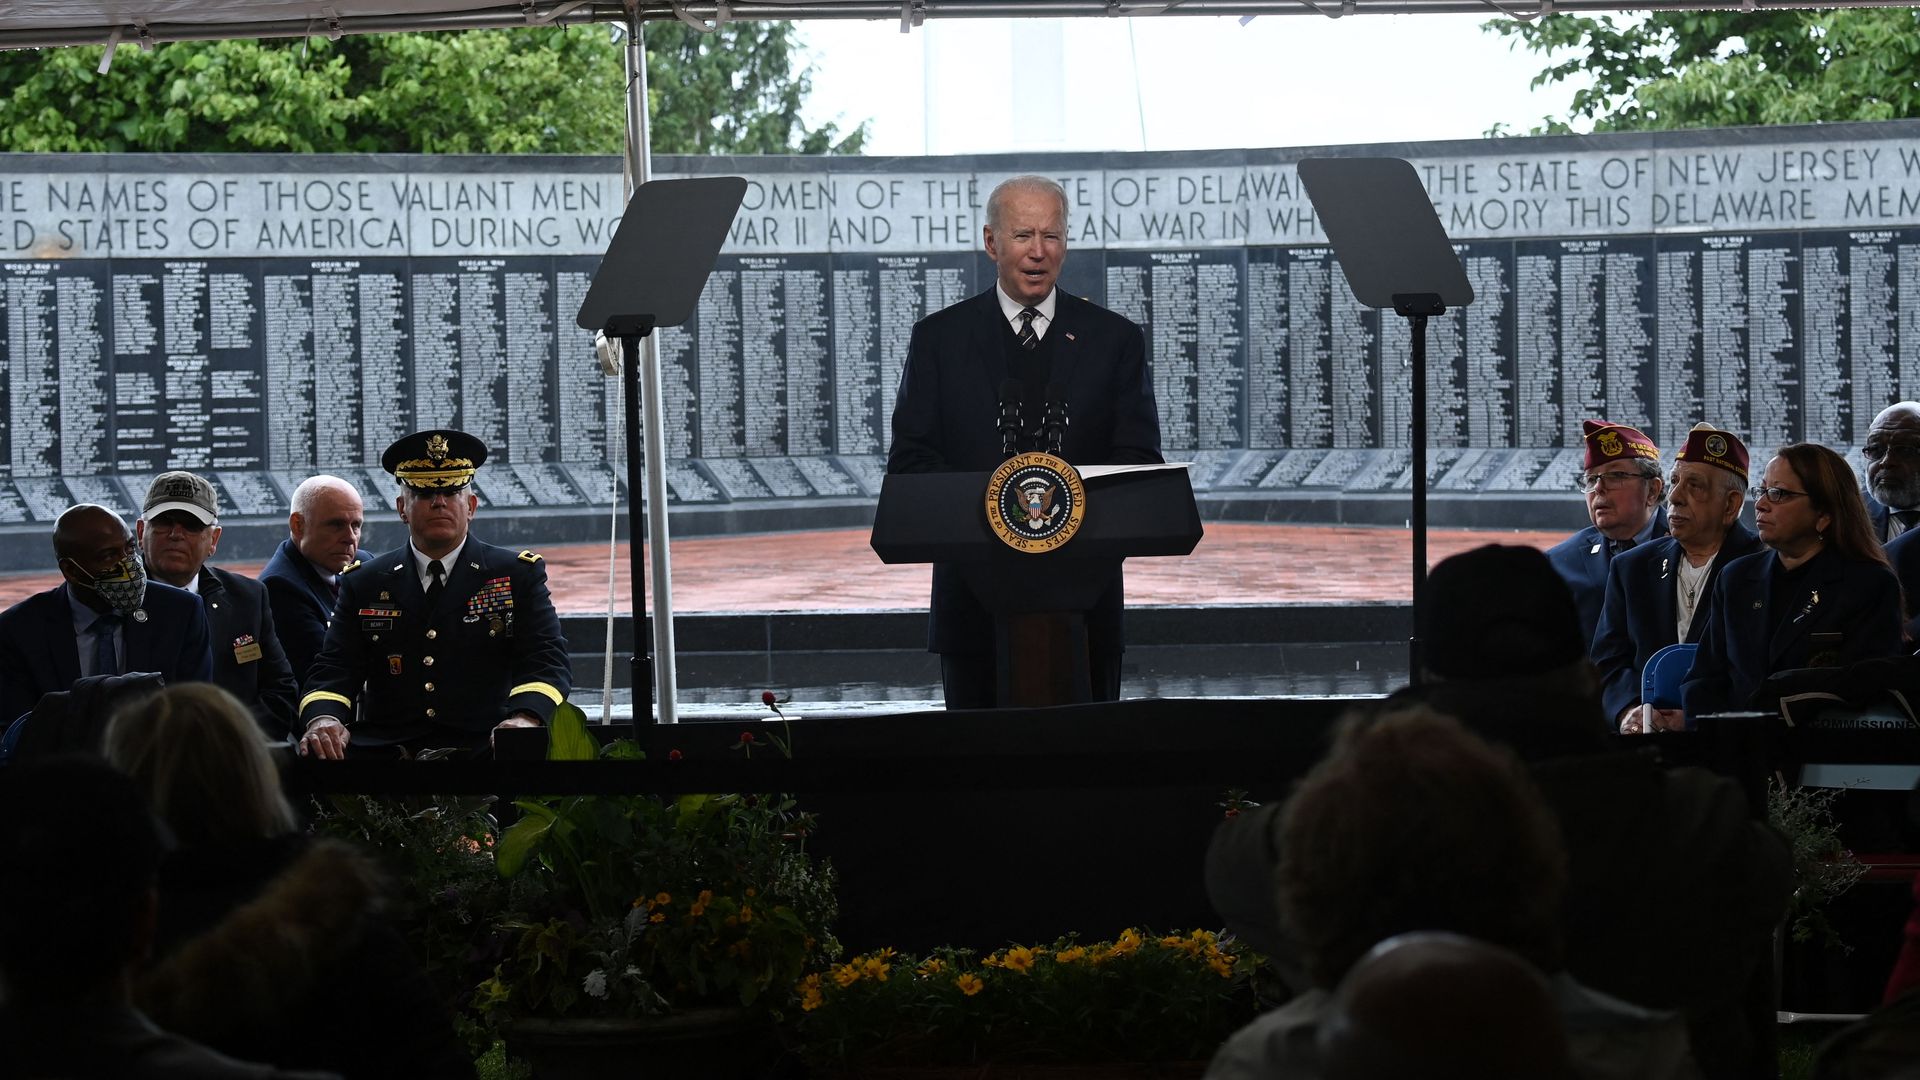 President Biden is flanked by veterans and two teleprompters as he delivers a speech at Veterans Memorial Park in New Castle, Delaware